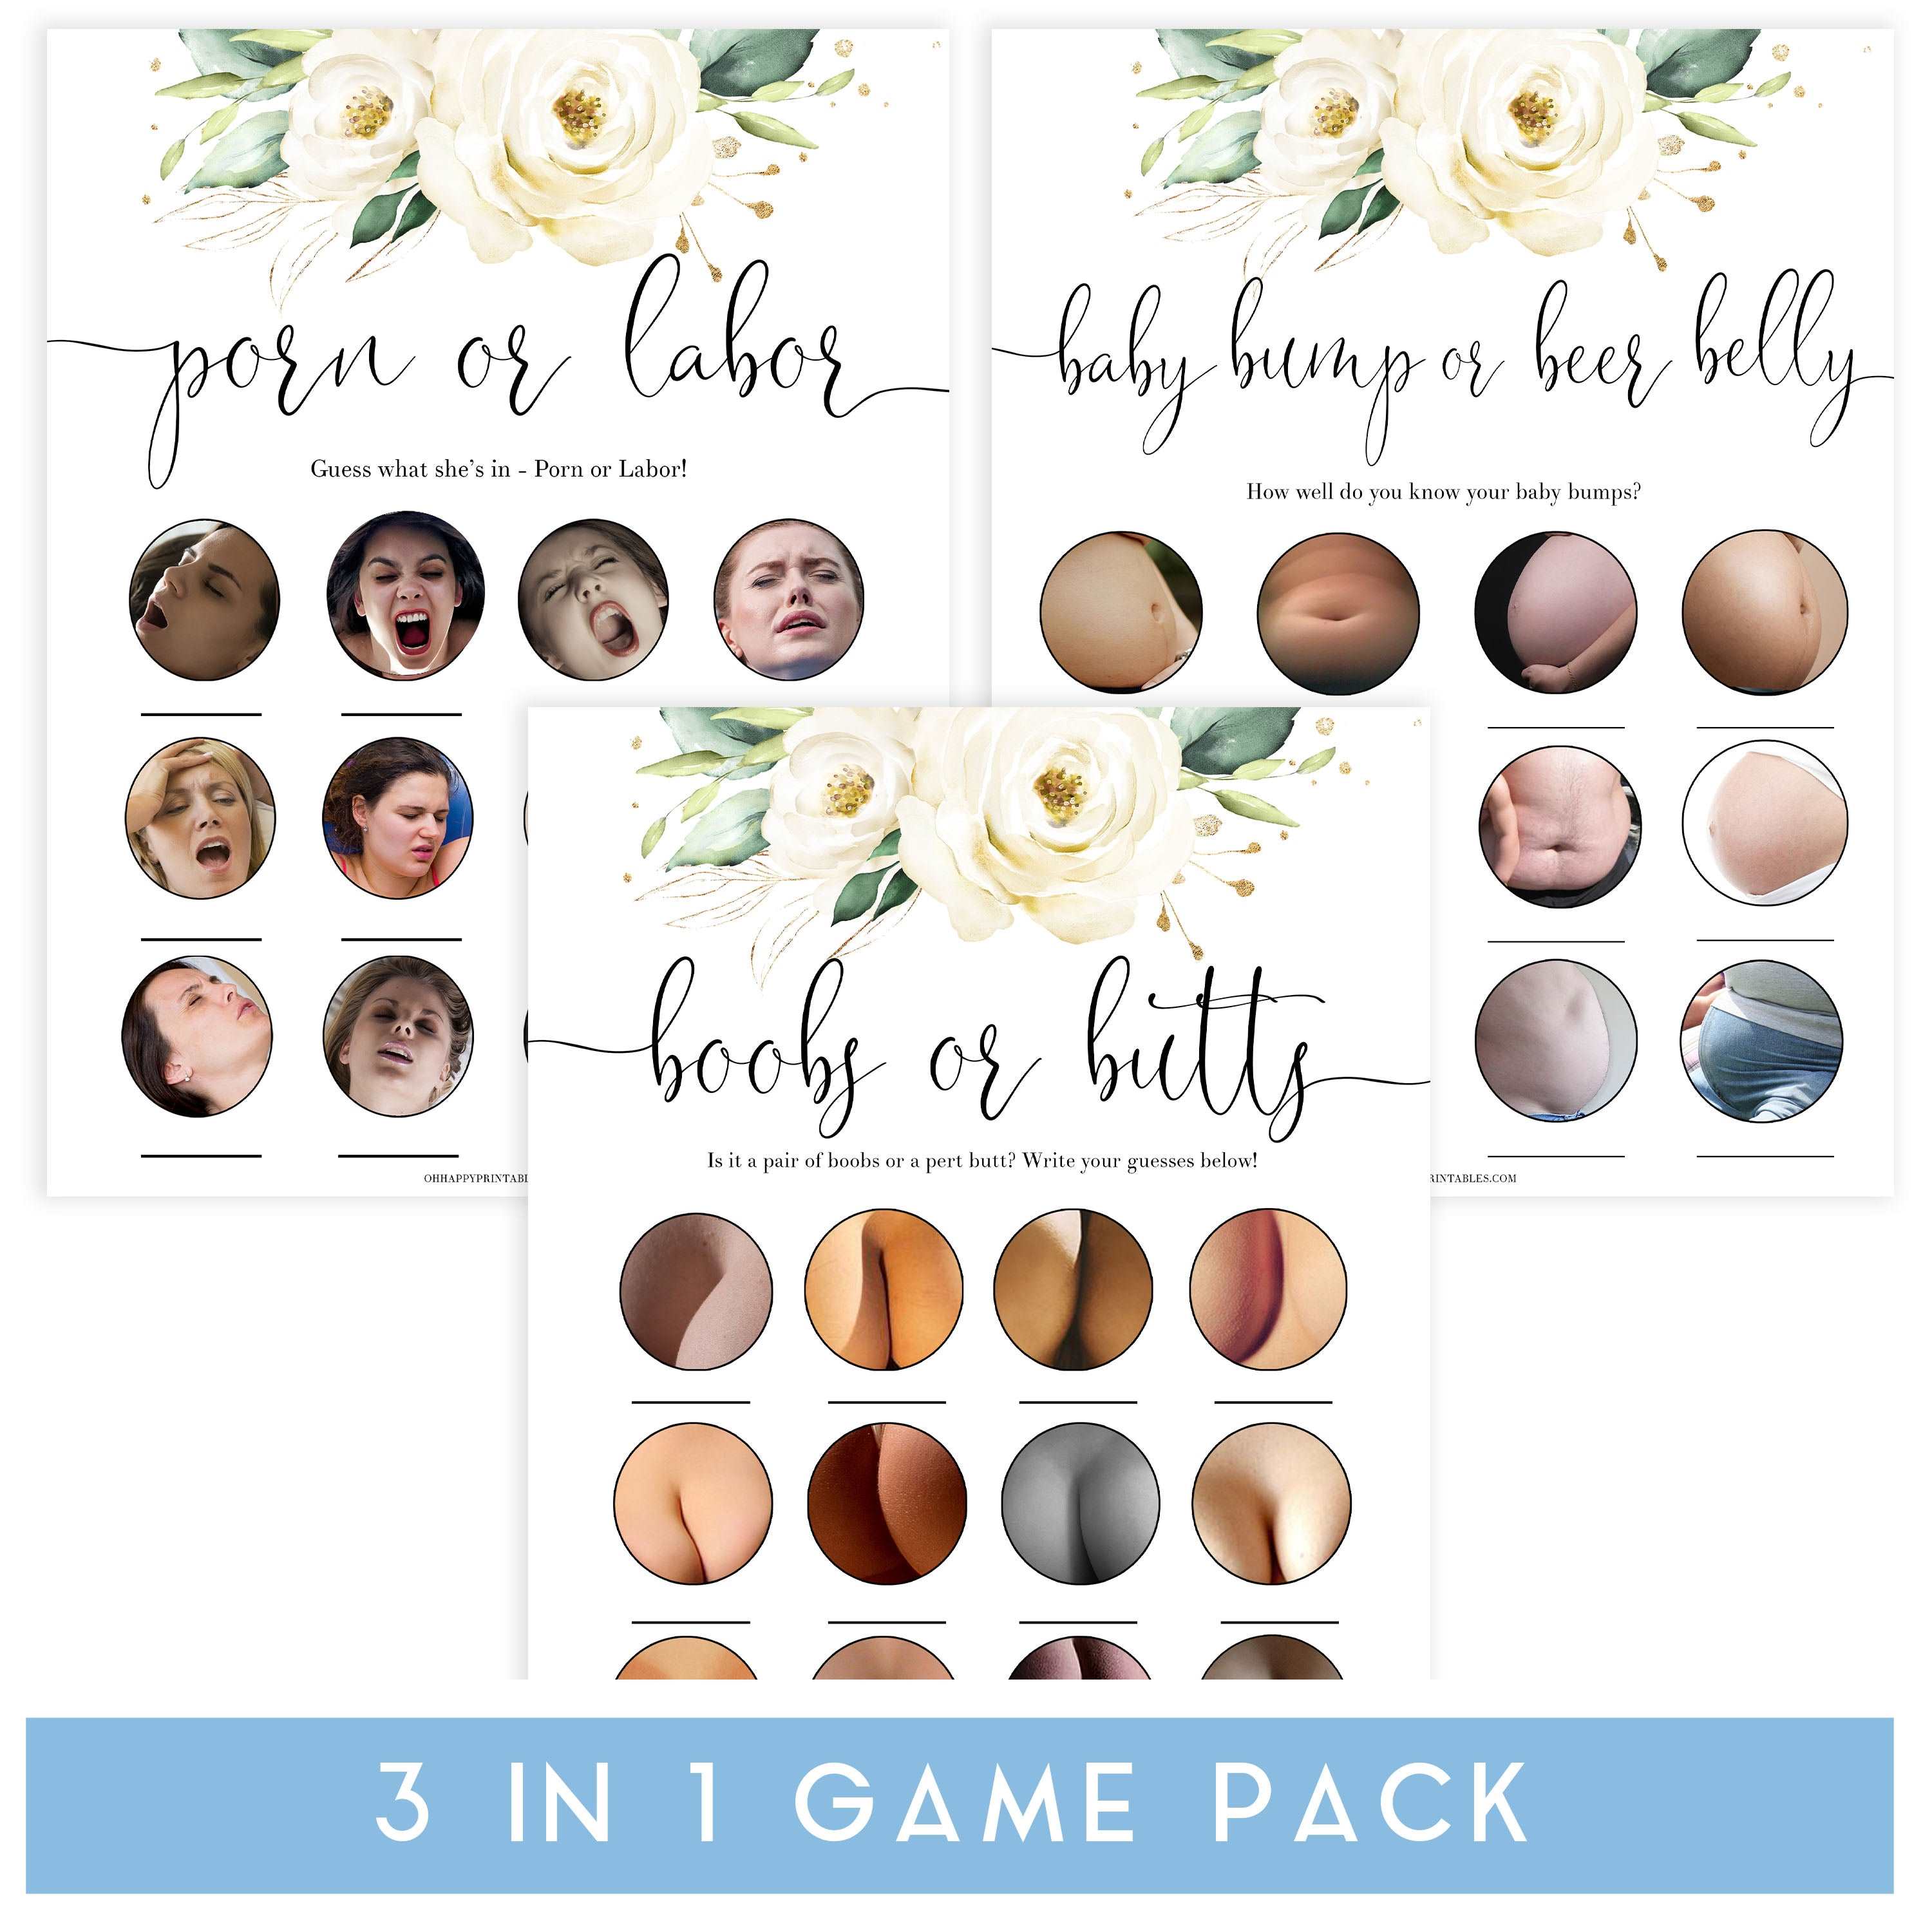 porn or labor game, baby bump or beer belly, boobs or butts game, Printable baby shower games, shite floral baby games, baby shower games, fun baby shower ideas, top baby shower ideas, floral baby shower, baby shower games, fun floral baby shower ideas